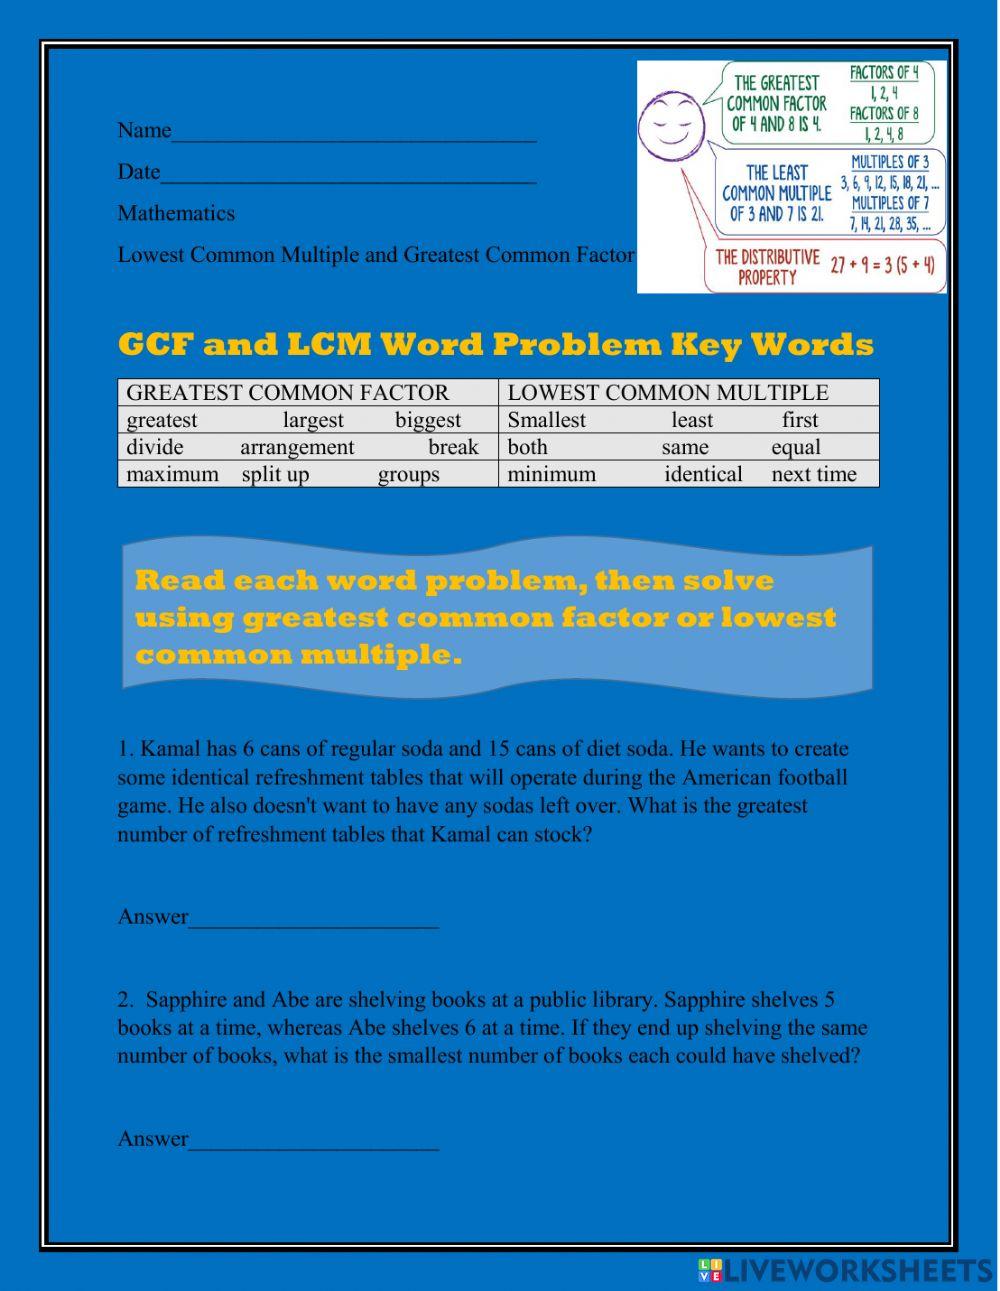 LCM and GCF Word Problems